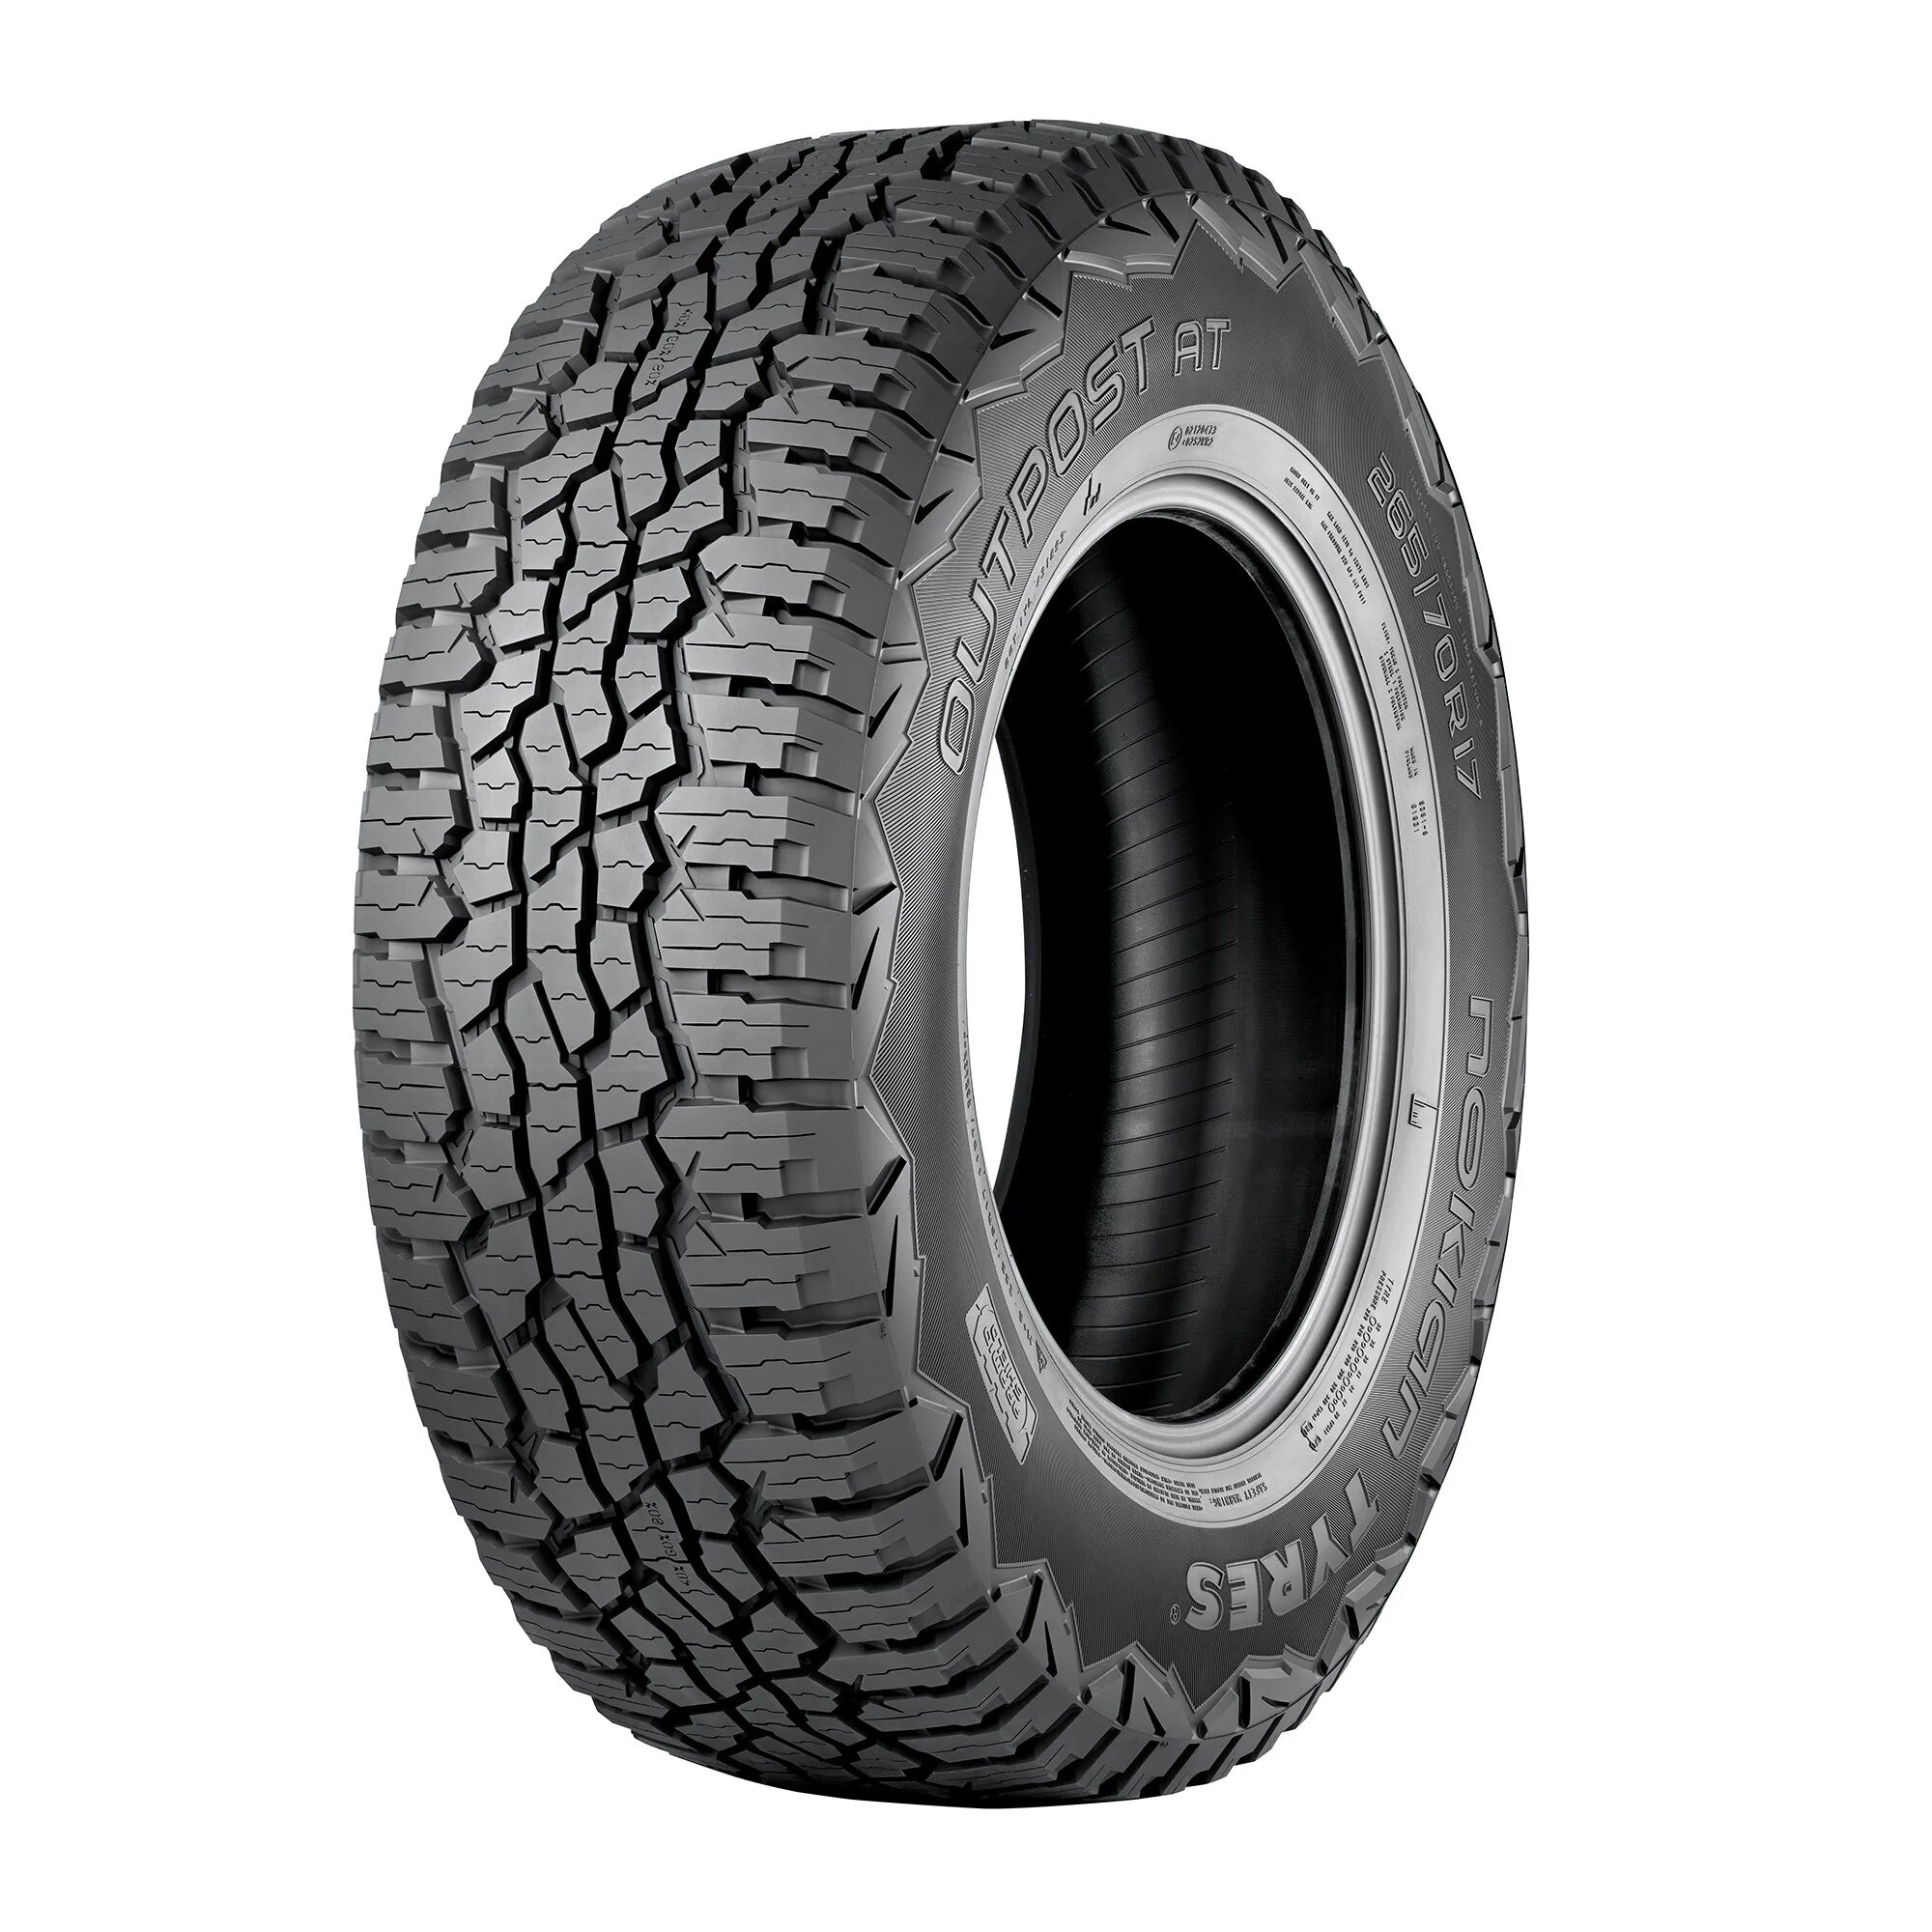 265 65 18 купить. Nokian Outpost at 265/70 r16. Nokian Tyres Outpost at 215/65 r16. Нокиан оутпост АТ 245/70 r17. Шина Nokian Outpost at.